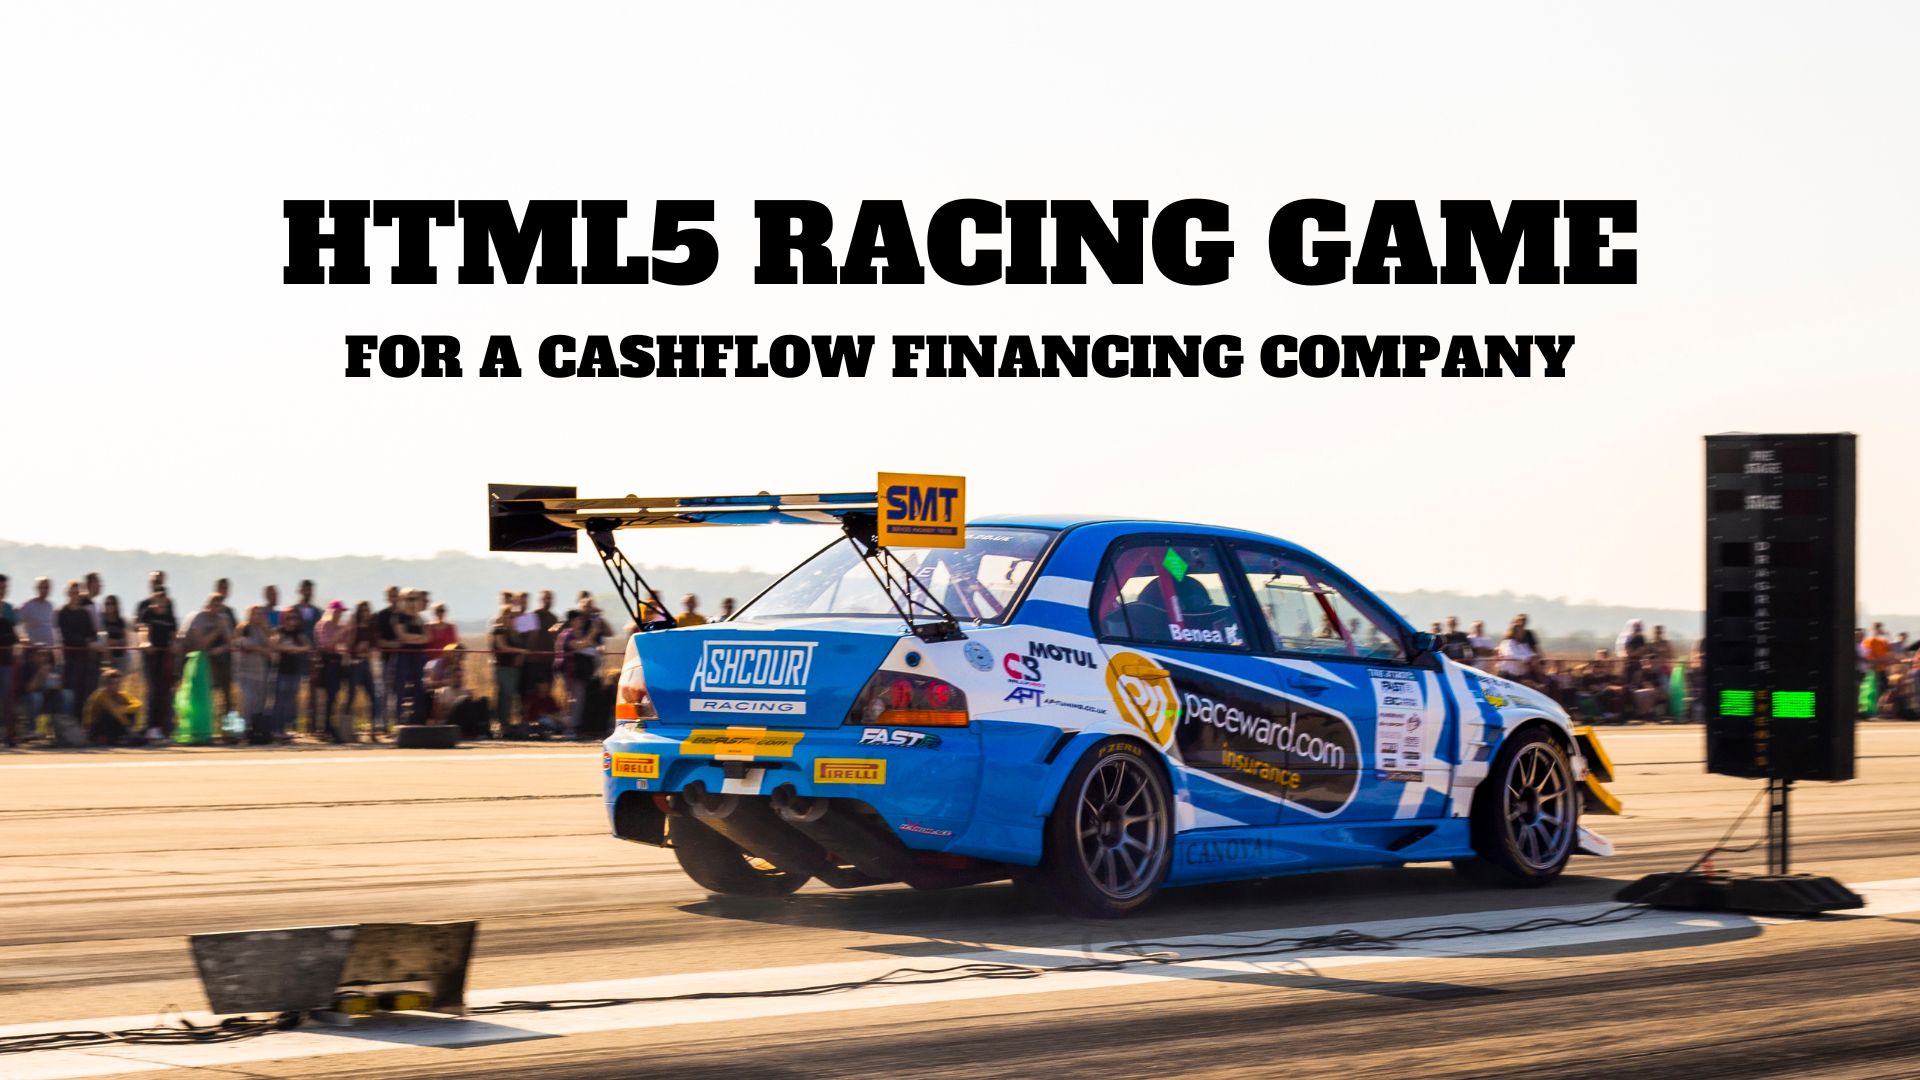 HTML5 Racing Game For A Cashflow Financing Company